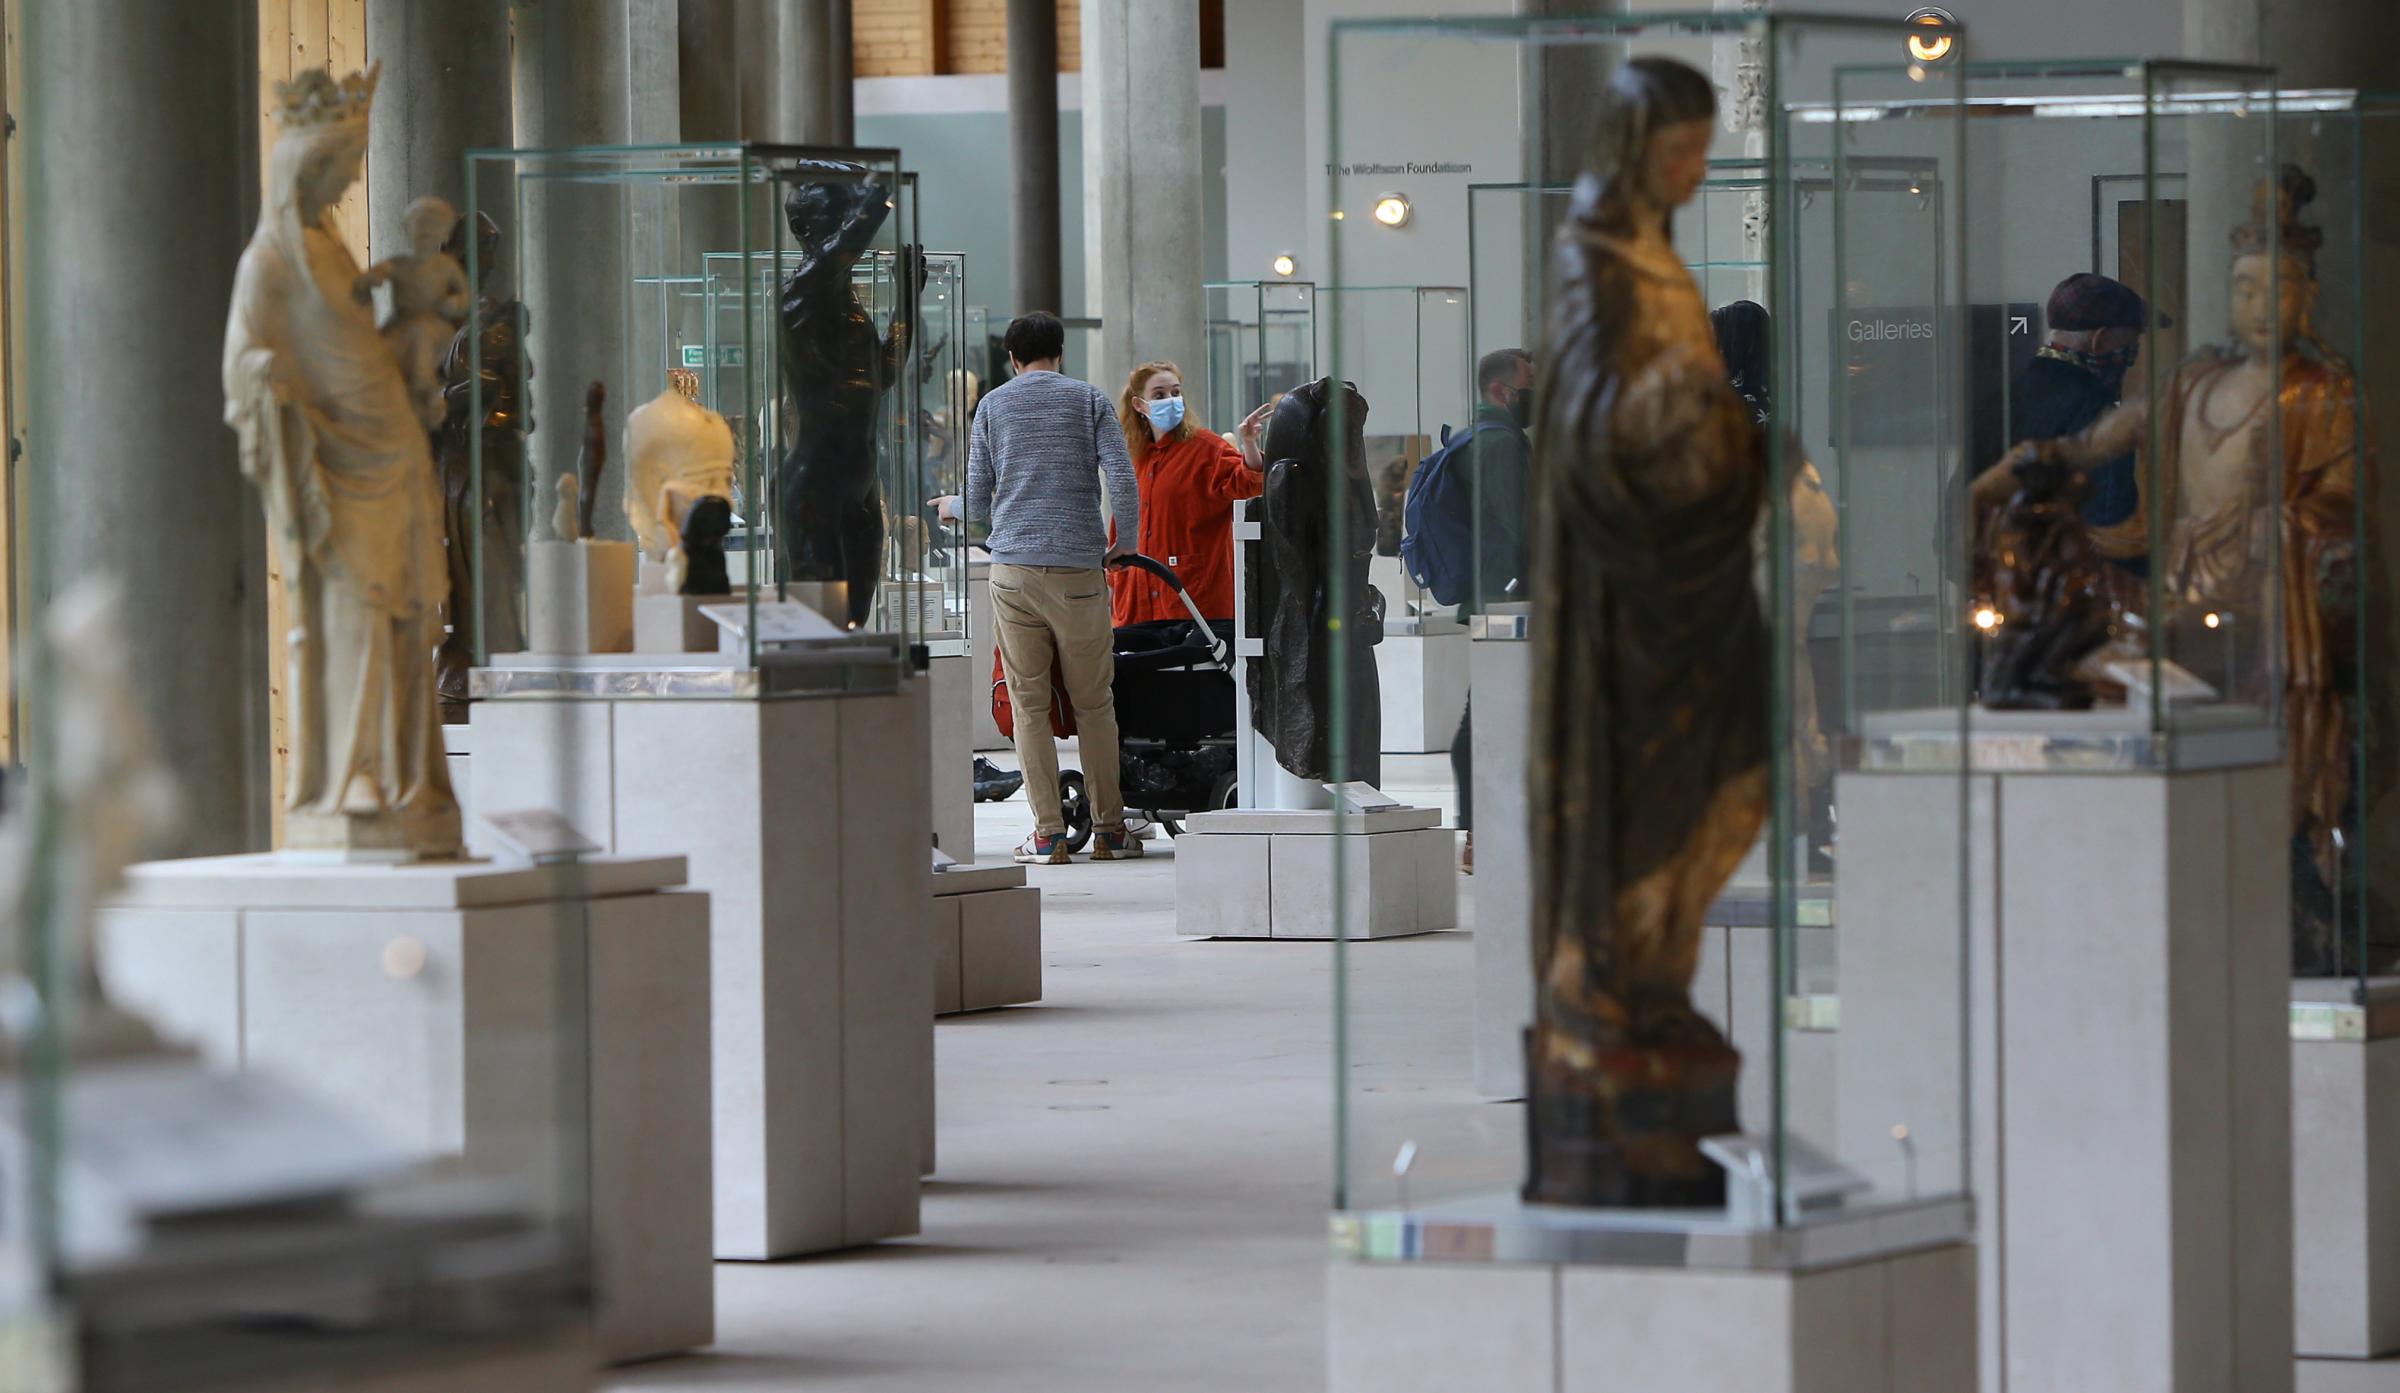 The Burrell Collection reopened after a £69million refurbishment. Pictured are visitors in the north gallery. Photograph by Colin Mearns.